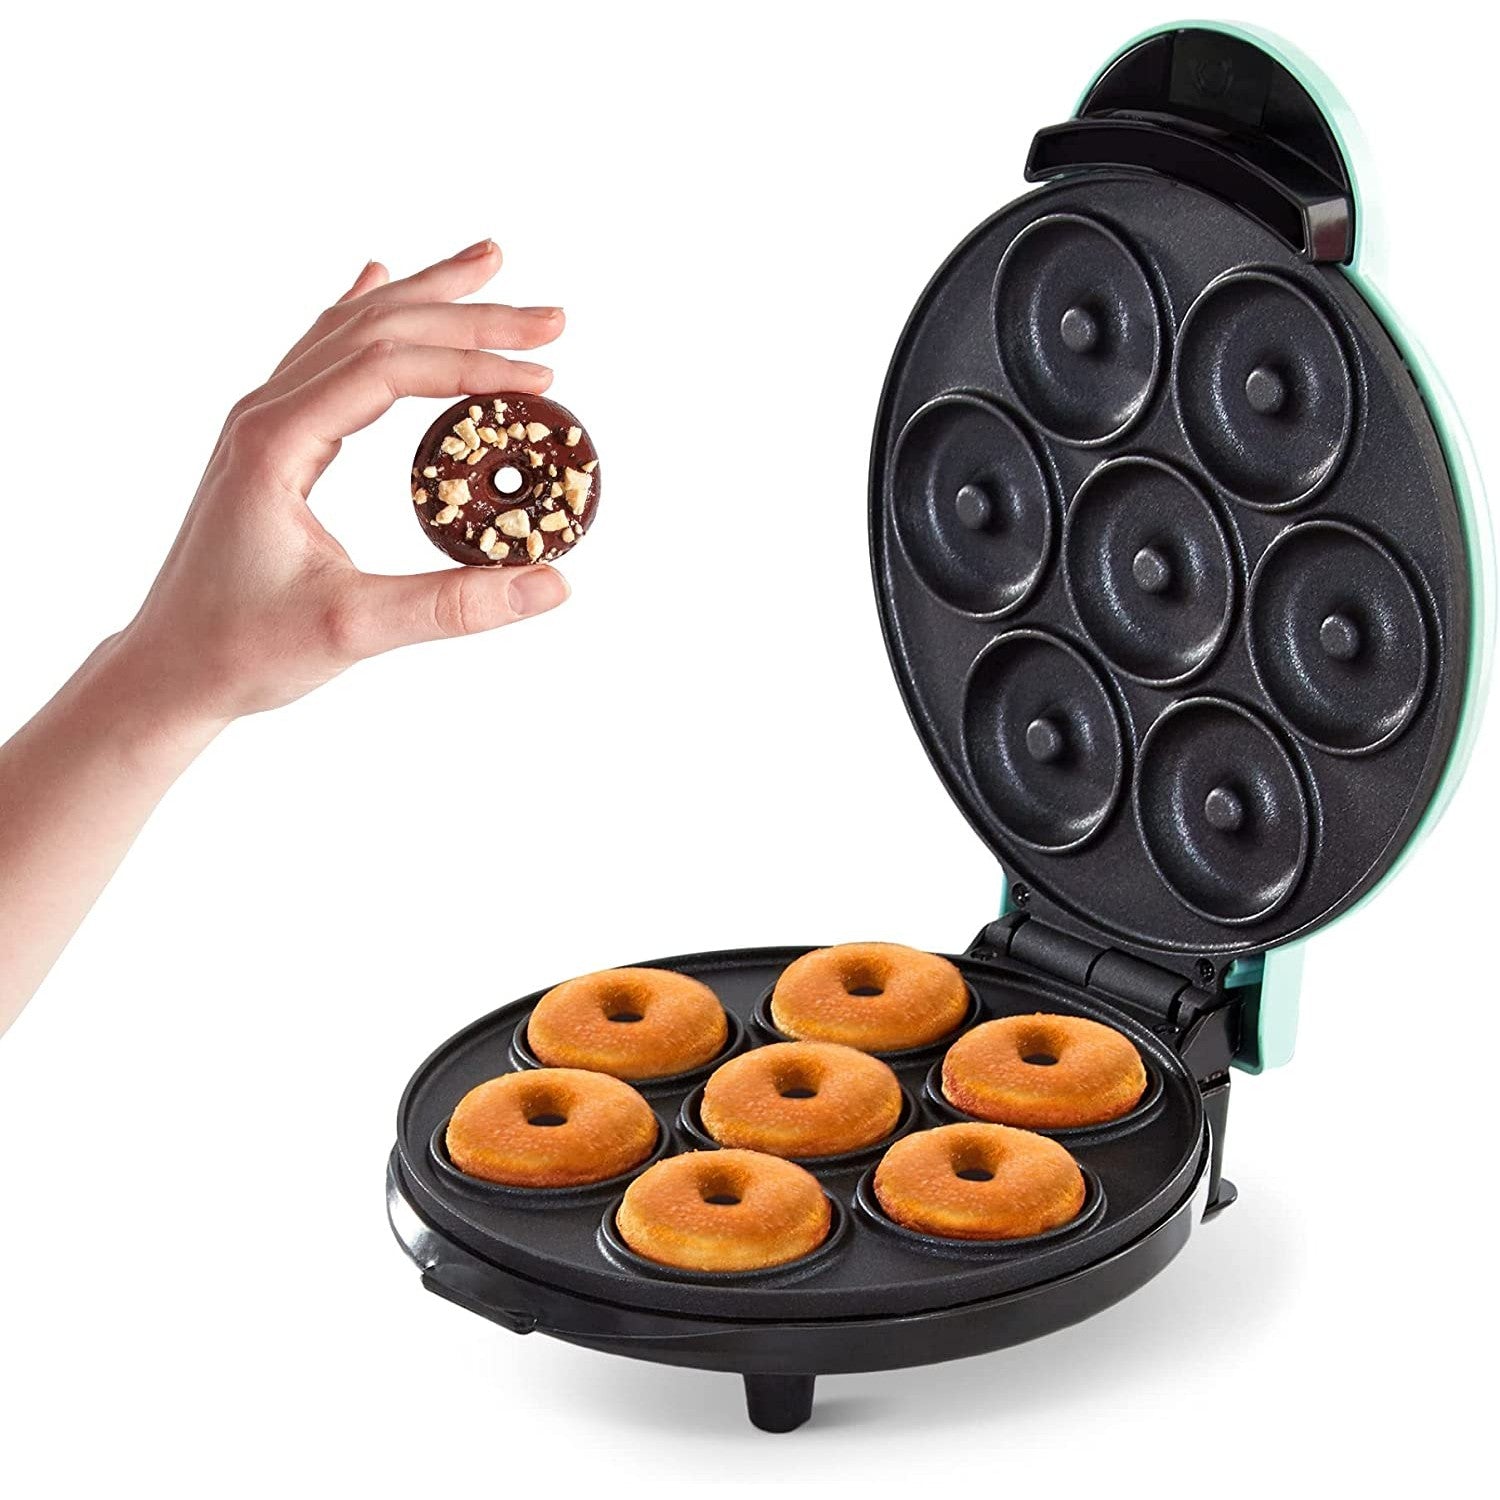 A mini donut maker with 7 freshly baked donuts inside the machine. A hand is holding a chocolate covered donut.